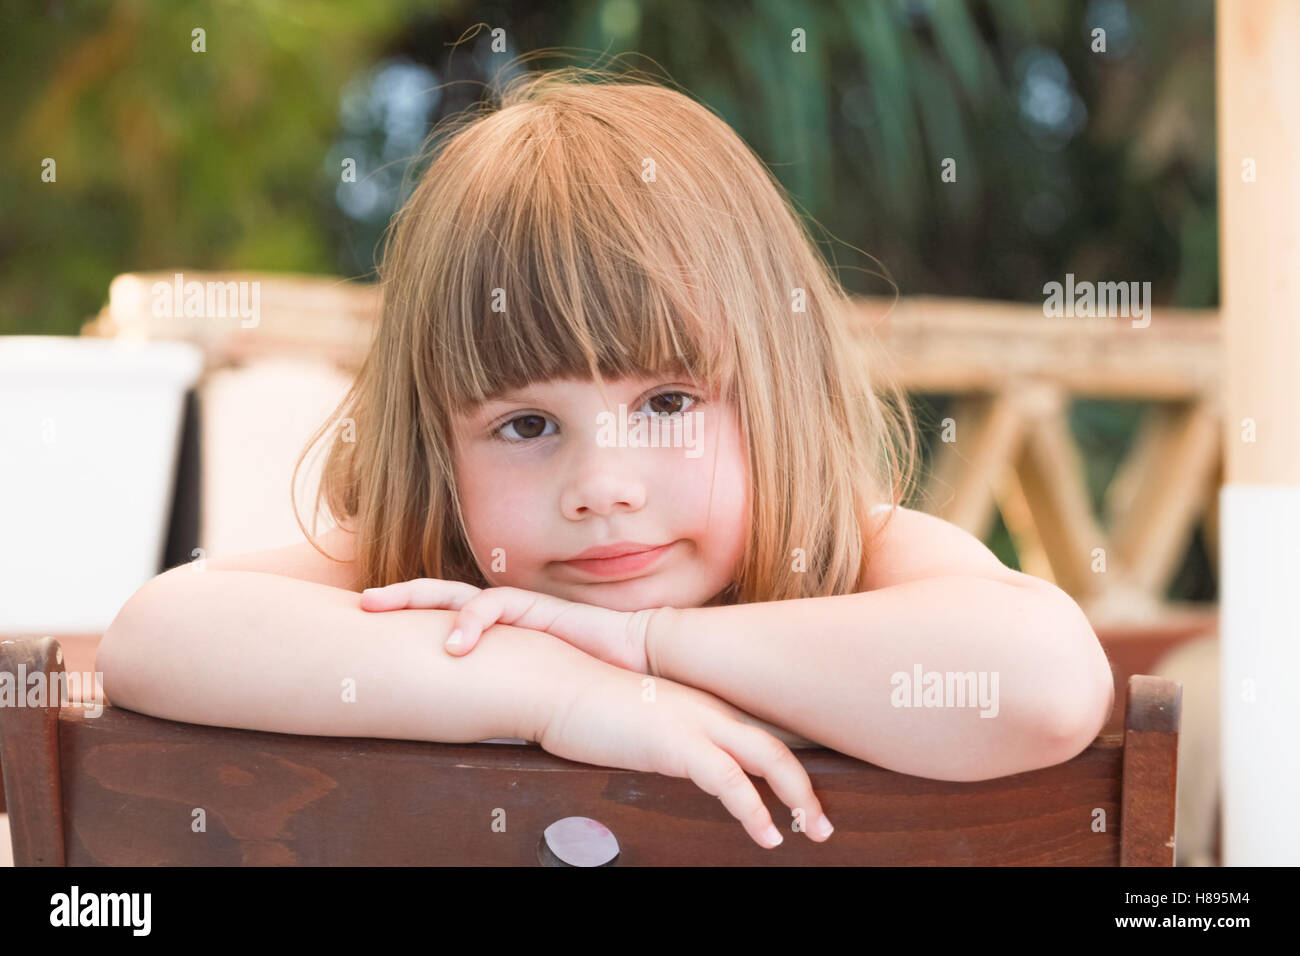 Cute tired Caucasian little girl, close-up outdoor portrait Stock Photo